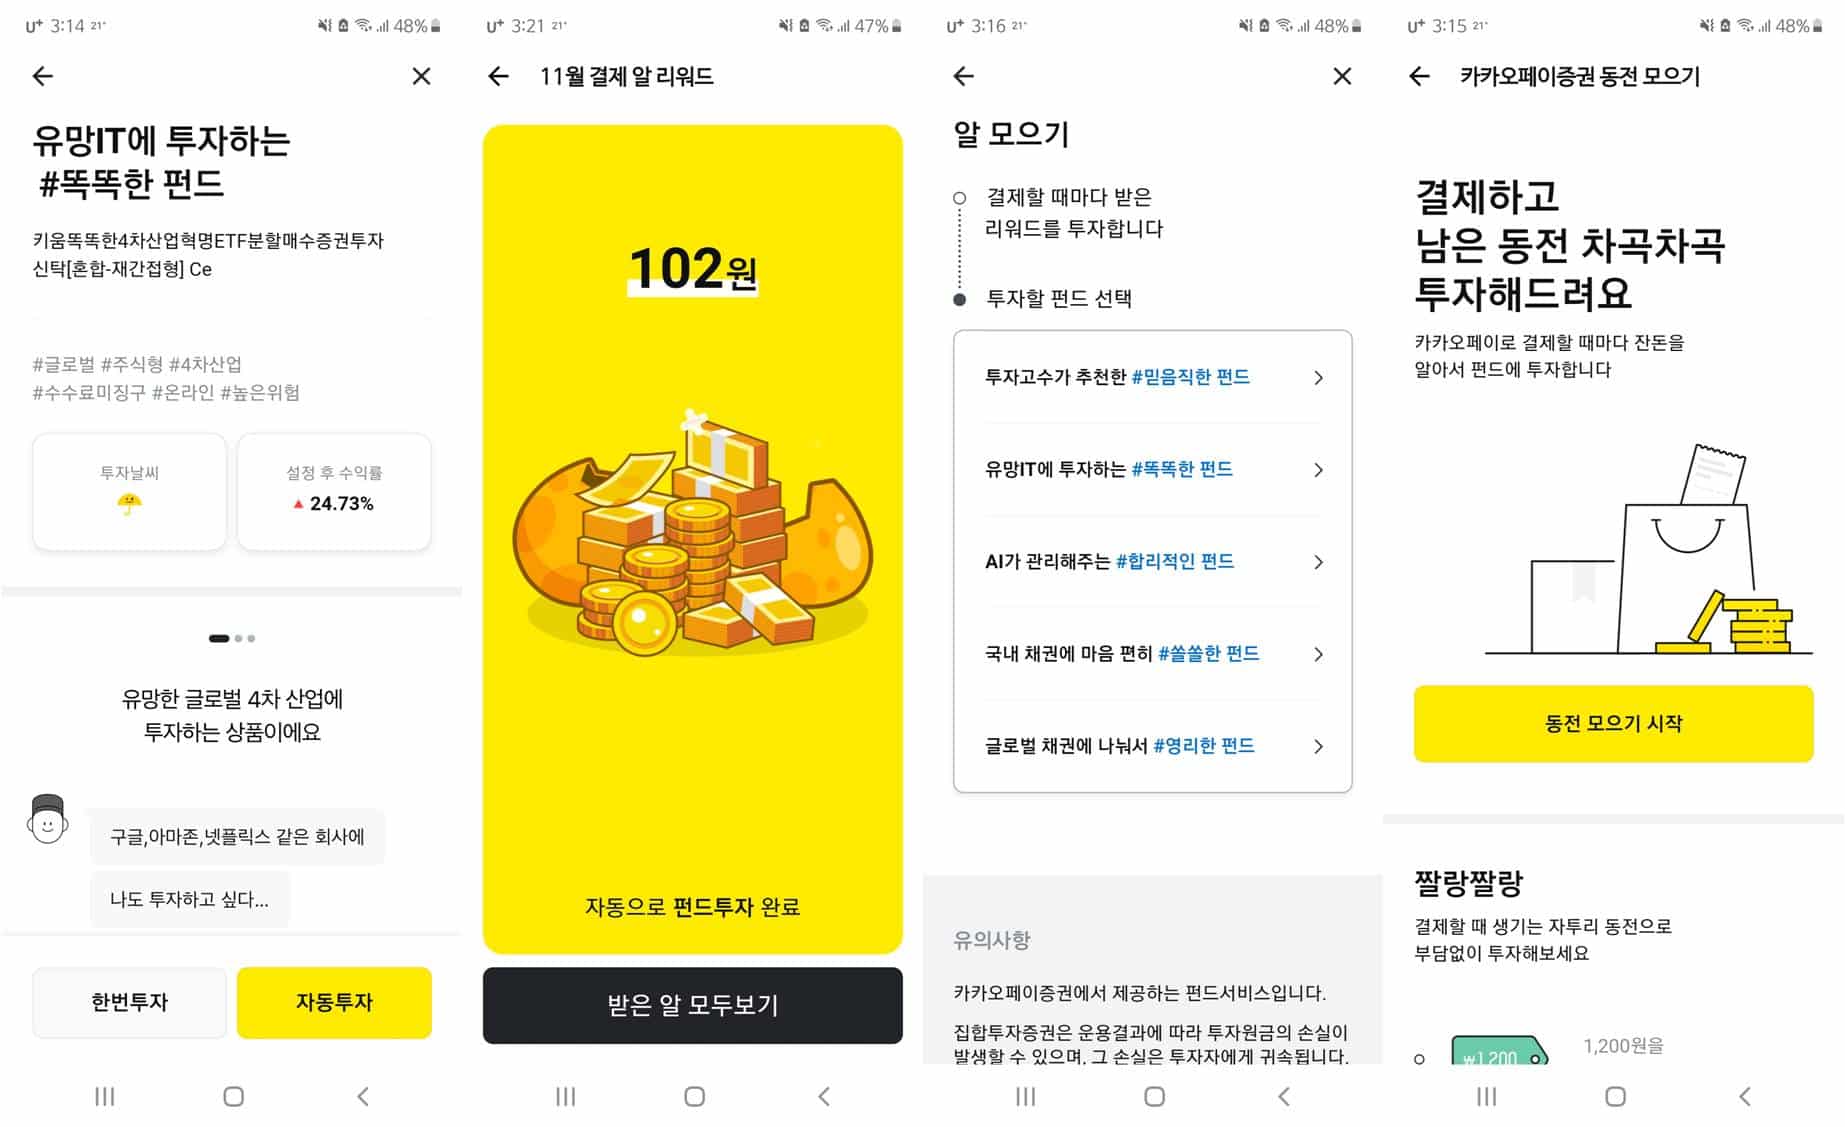 image1 Pangyo 2020 - Kakao Pay transaction amount increased by 72%